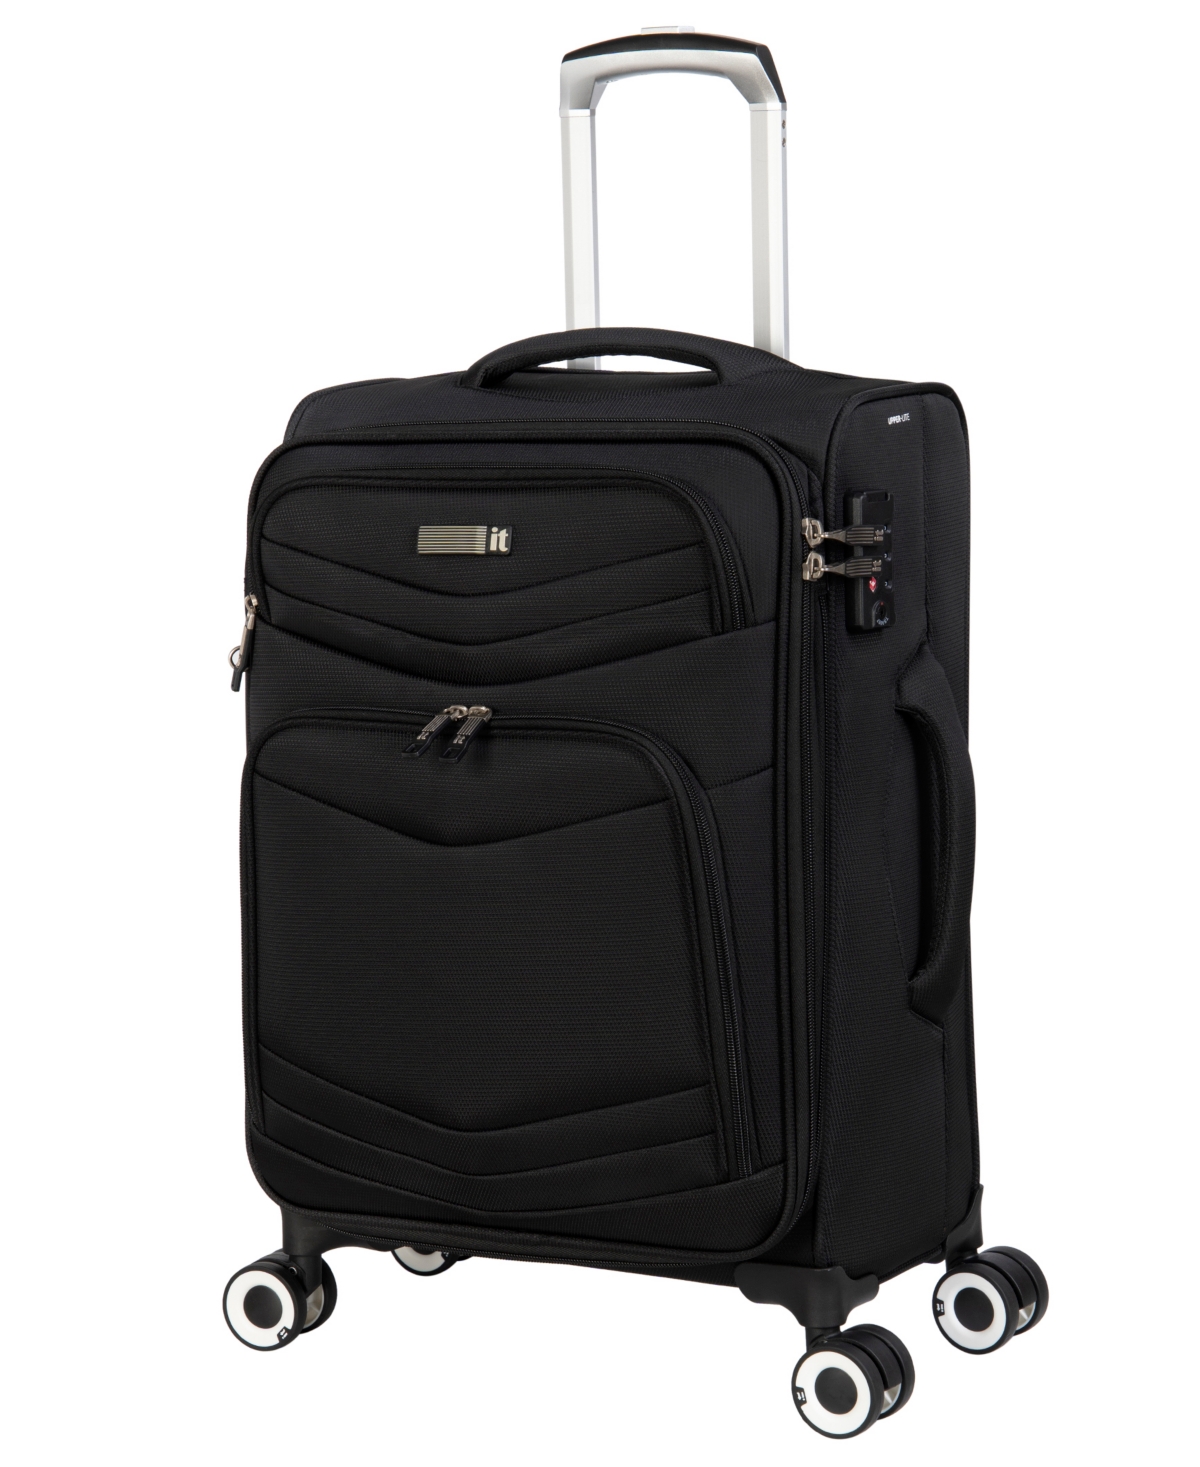 It Luggage Intrepid 20" 8-wheel Expandable Carry-on Luggage Case In Black